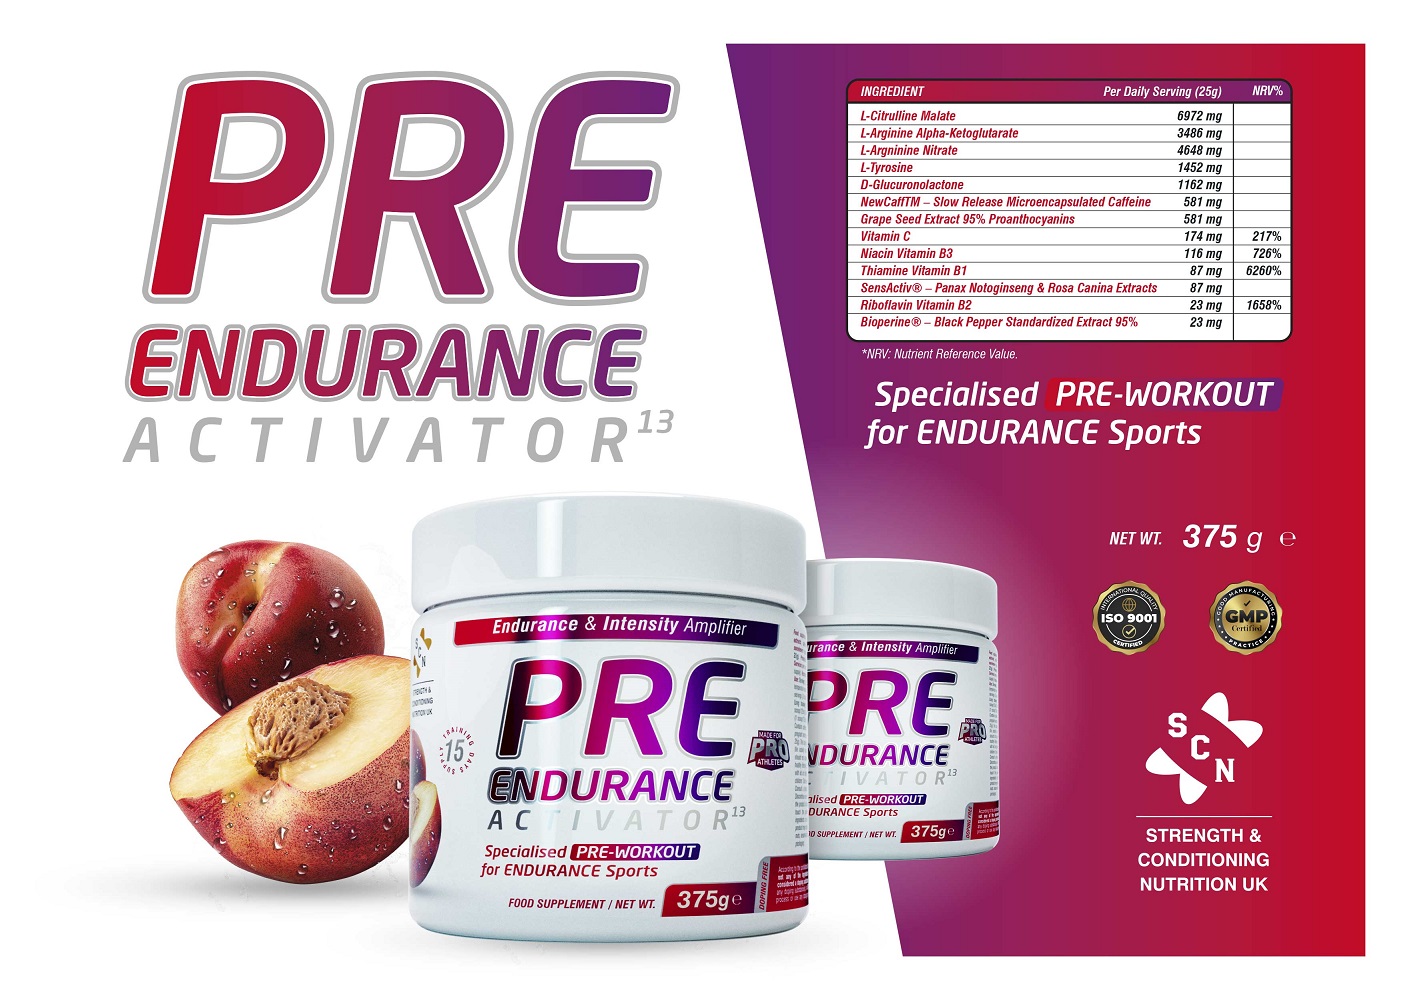 Pre-endurance - pre-workout For long endurance training nutritional table image by S-C-Nutrition.